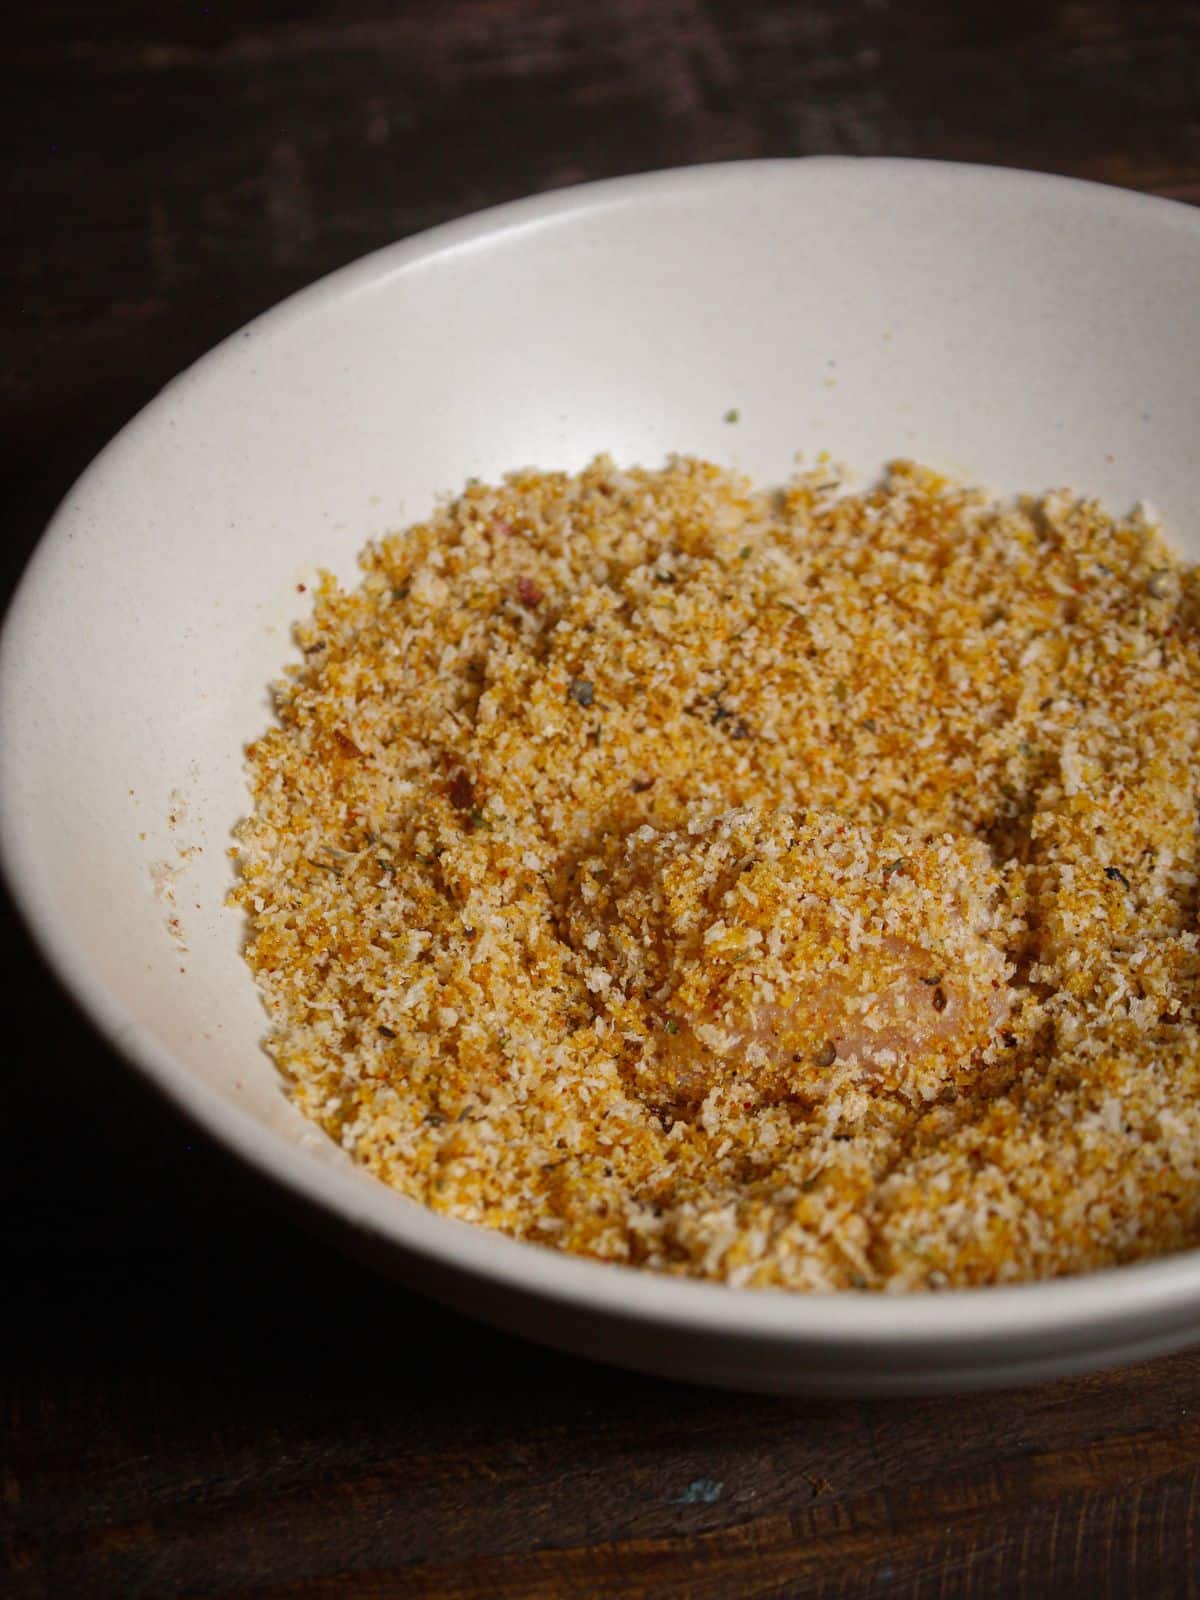 Marinate fish pieces with the bread crumbs 